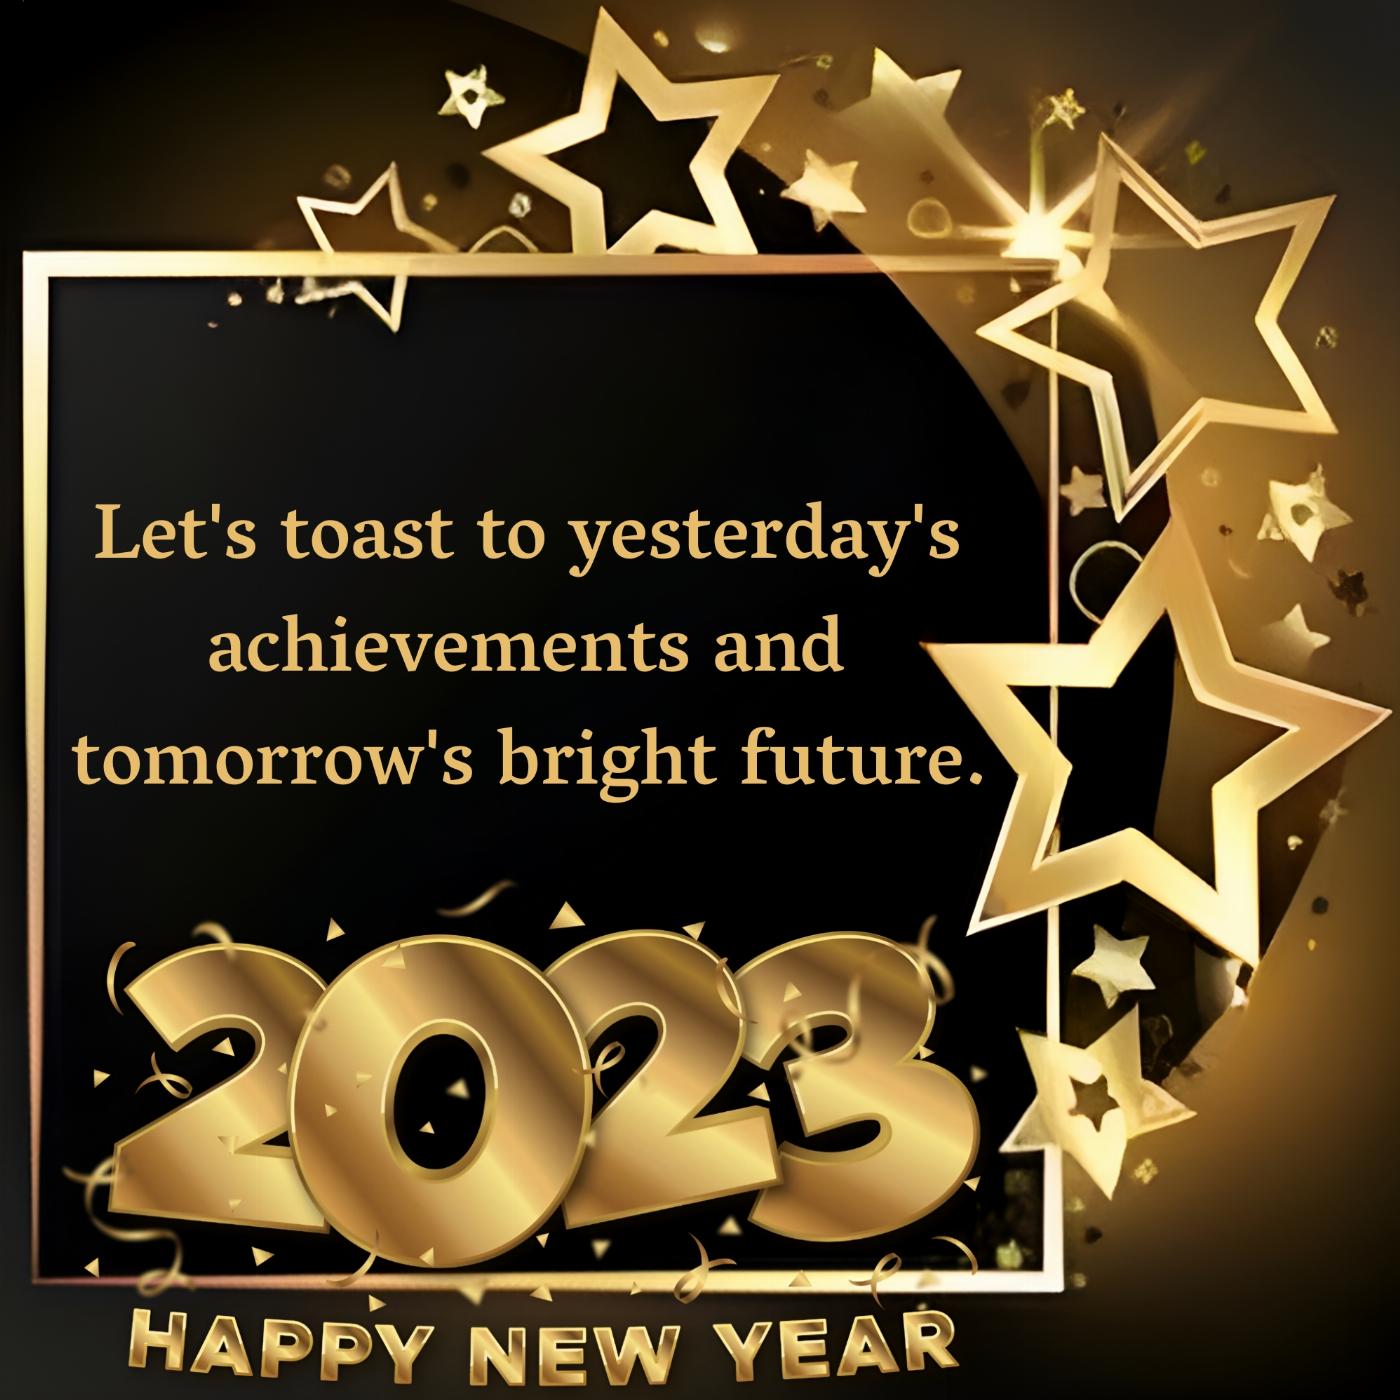 Let's toast to yesterday's achievements and tomorrow's bright future